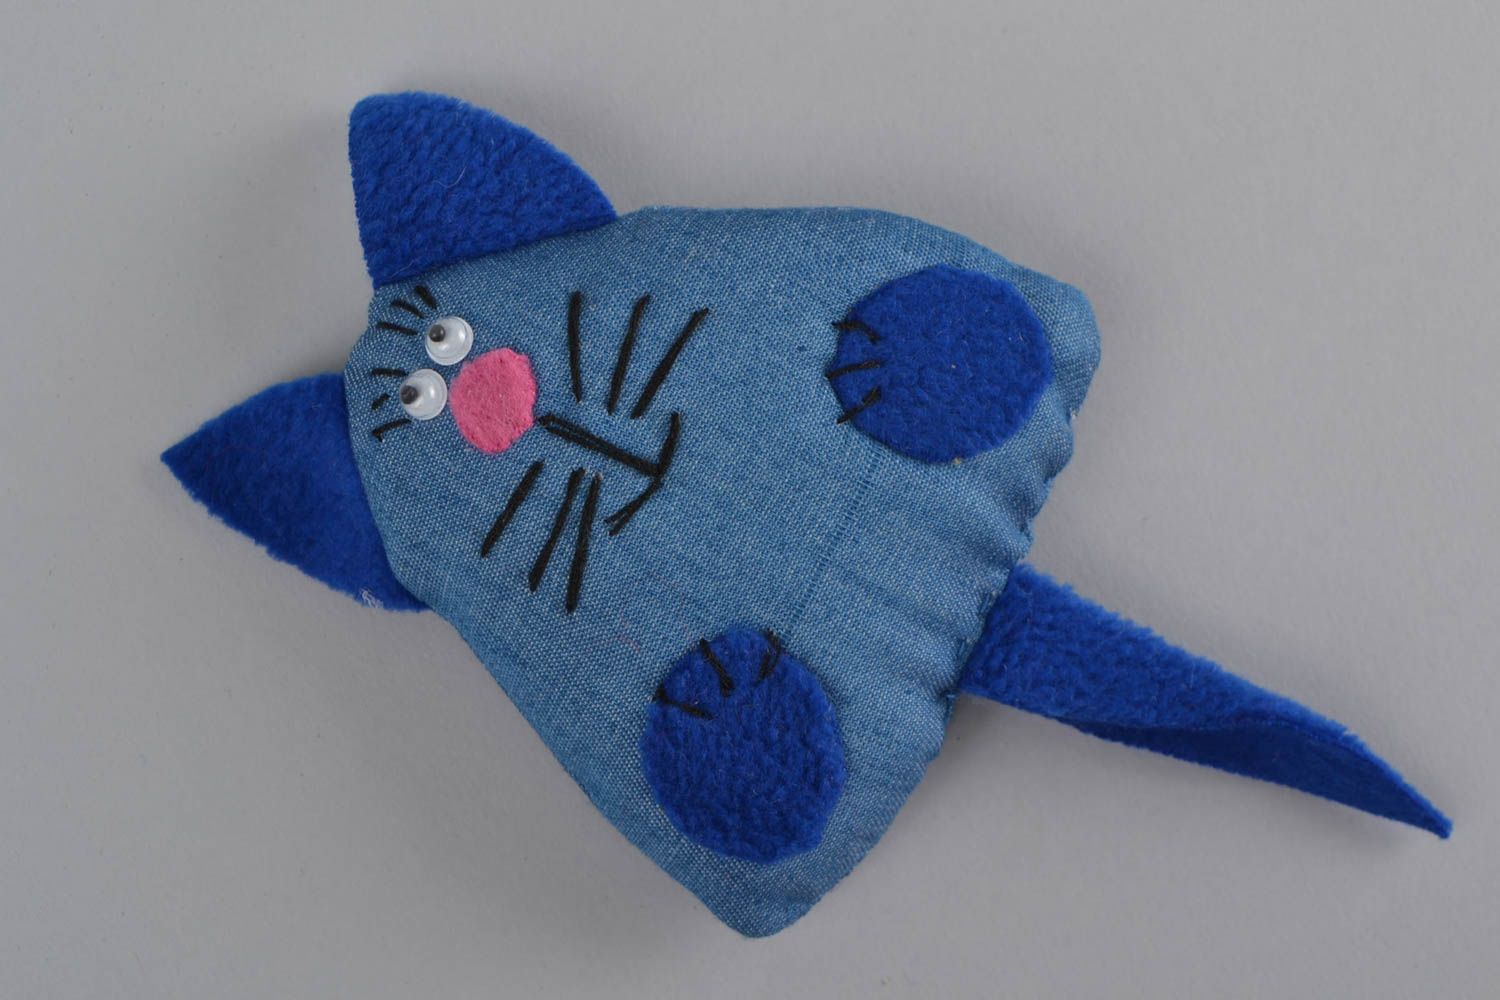 Fleece toy funny blue cat handmade decorative stuffed toy for home decor photo 3